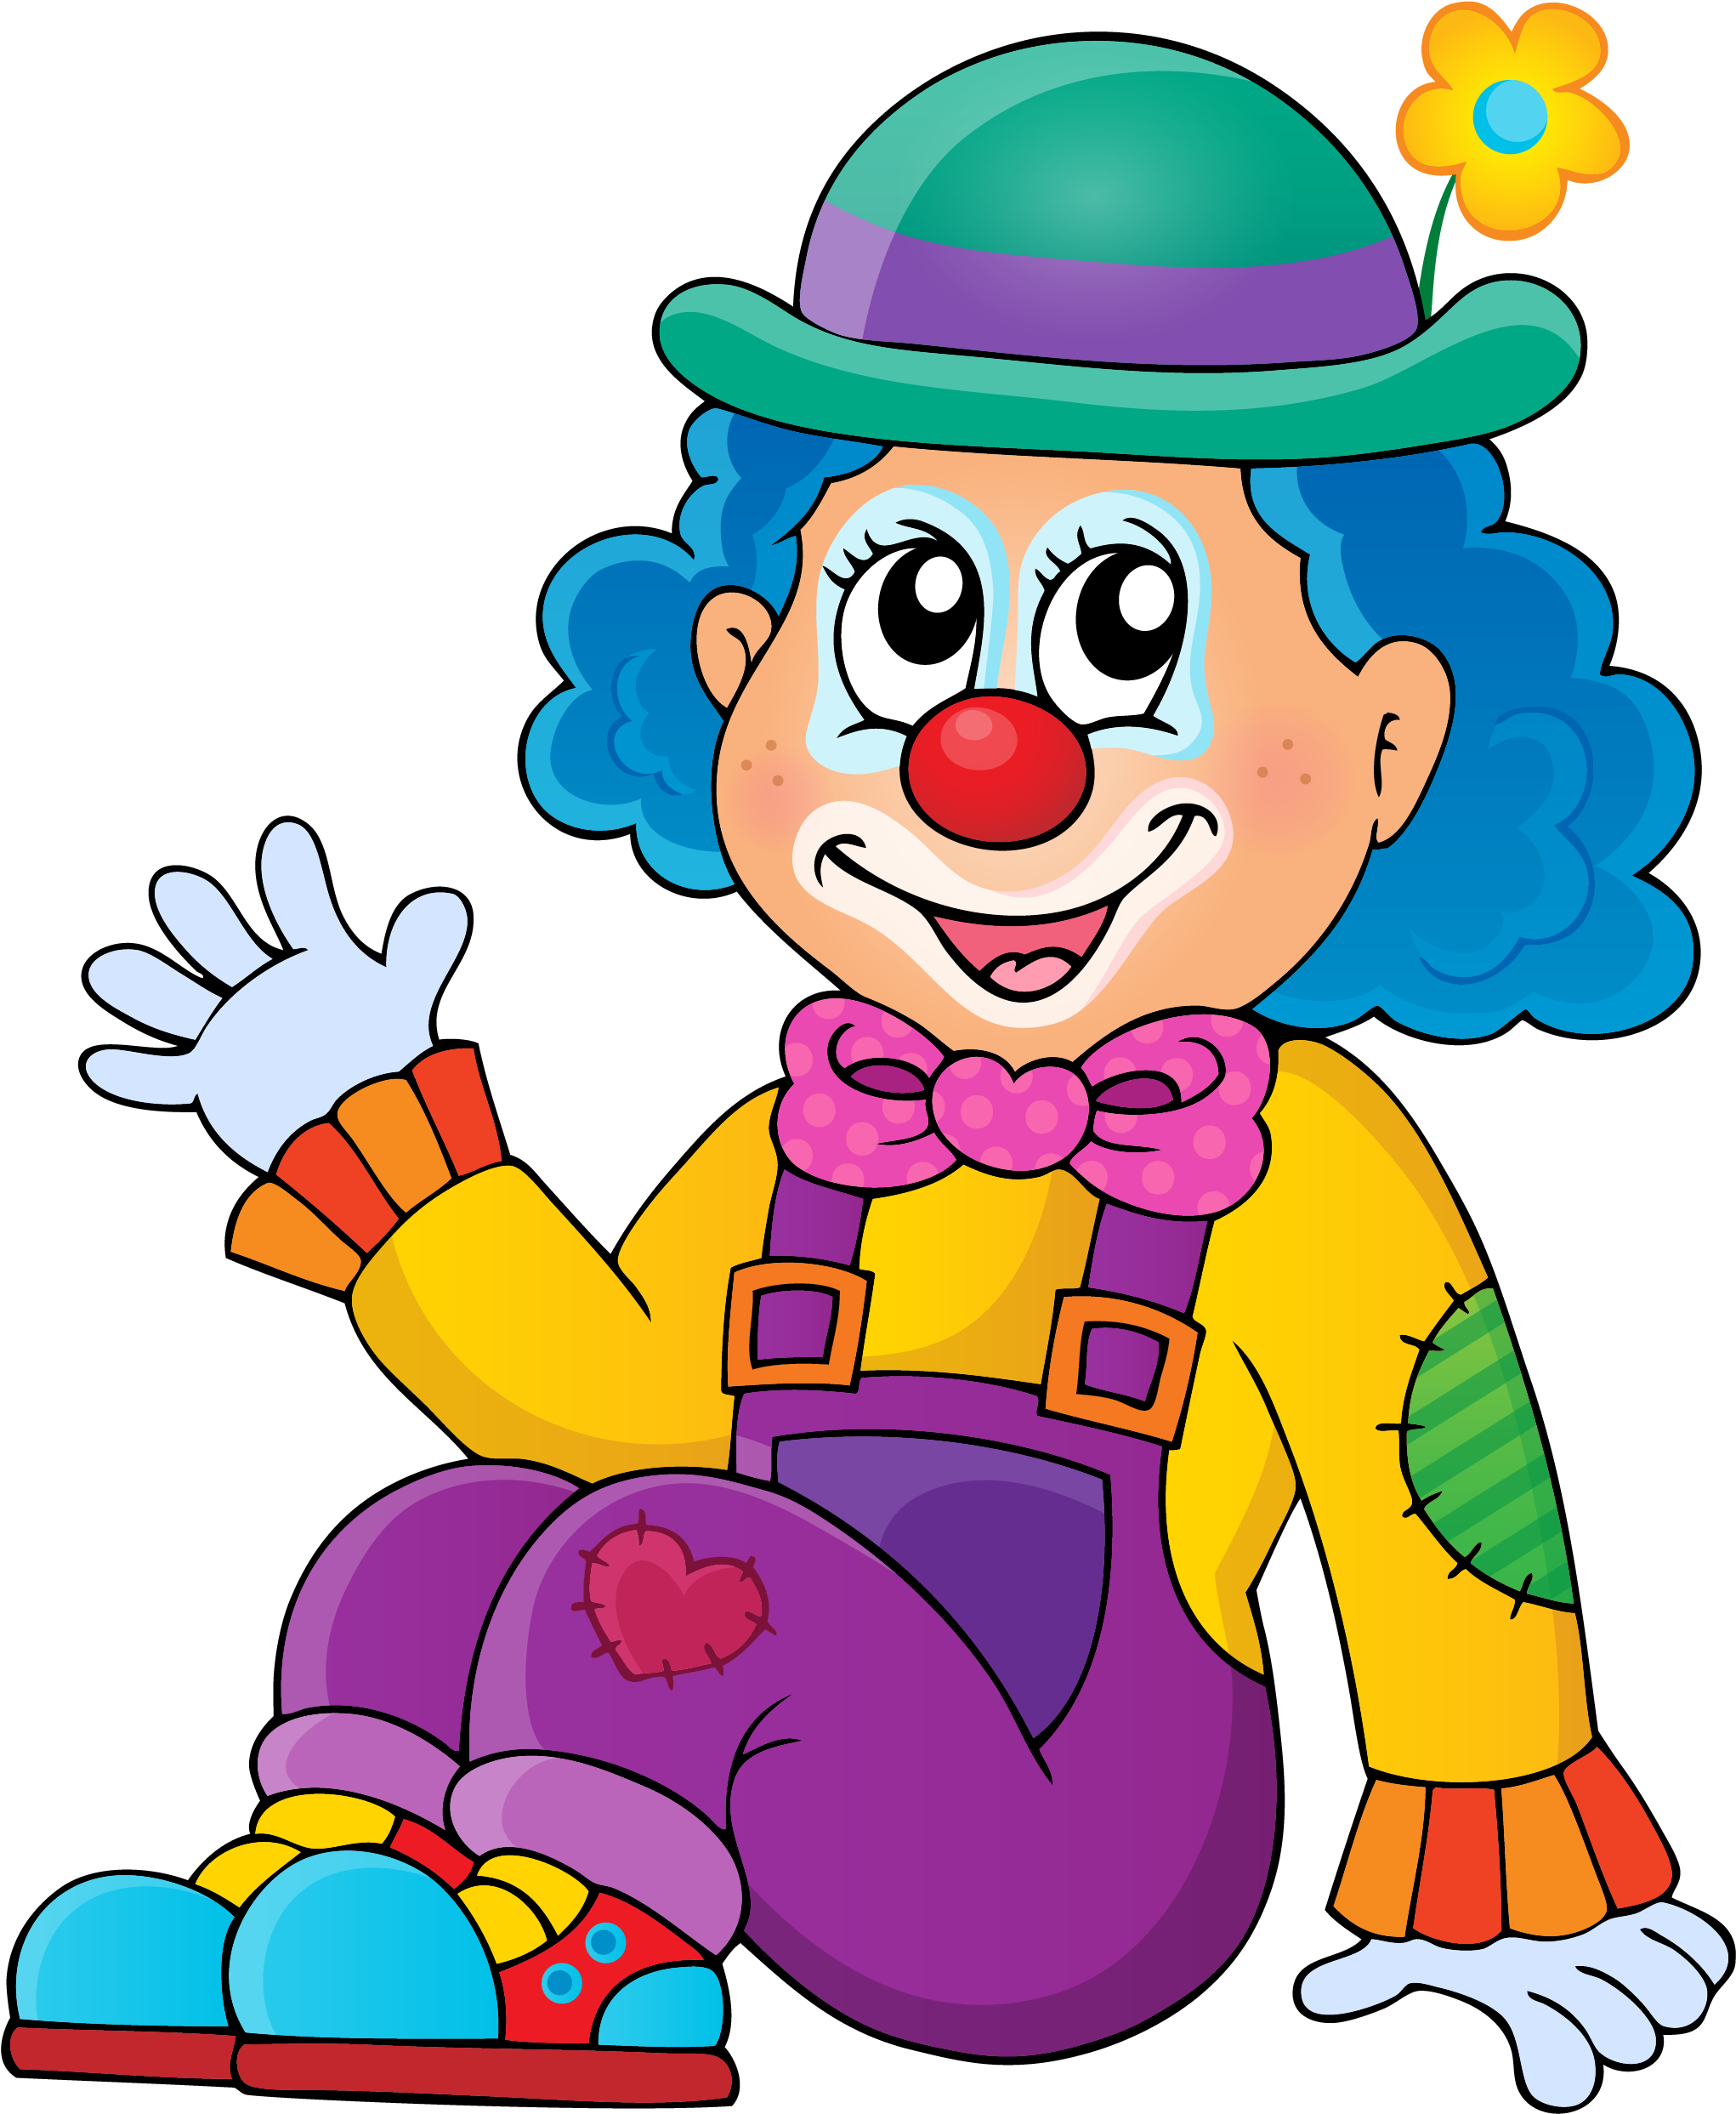 Royalty-free Clown Illustration - My Little Circus (a Coloring Book For Kids) (3261x3261)